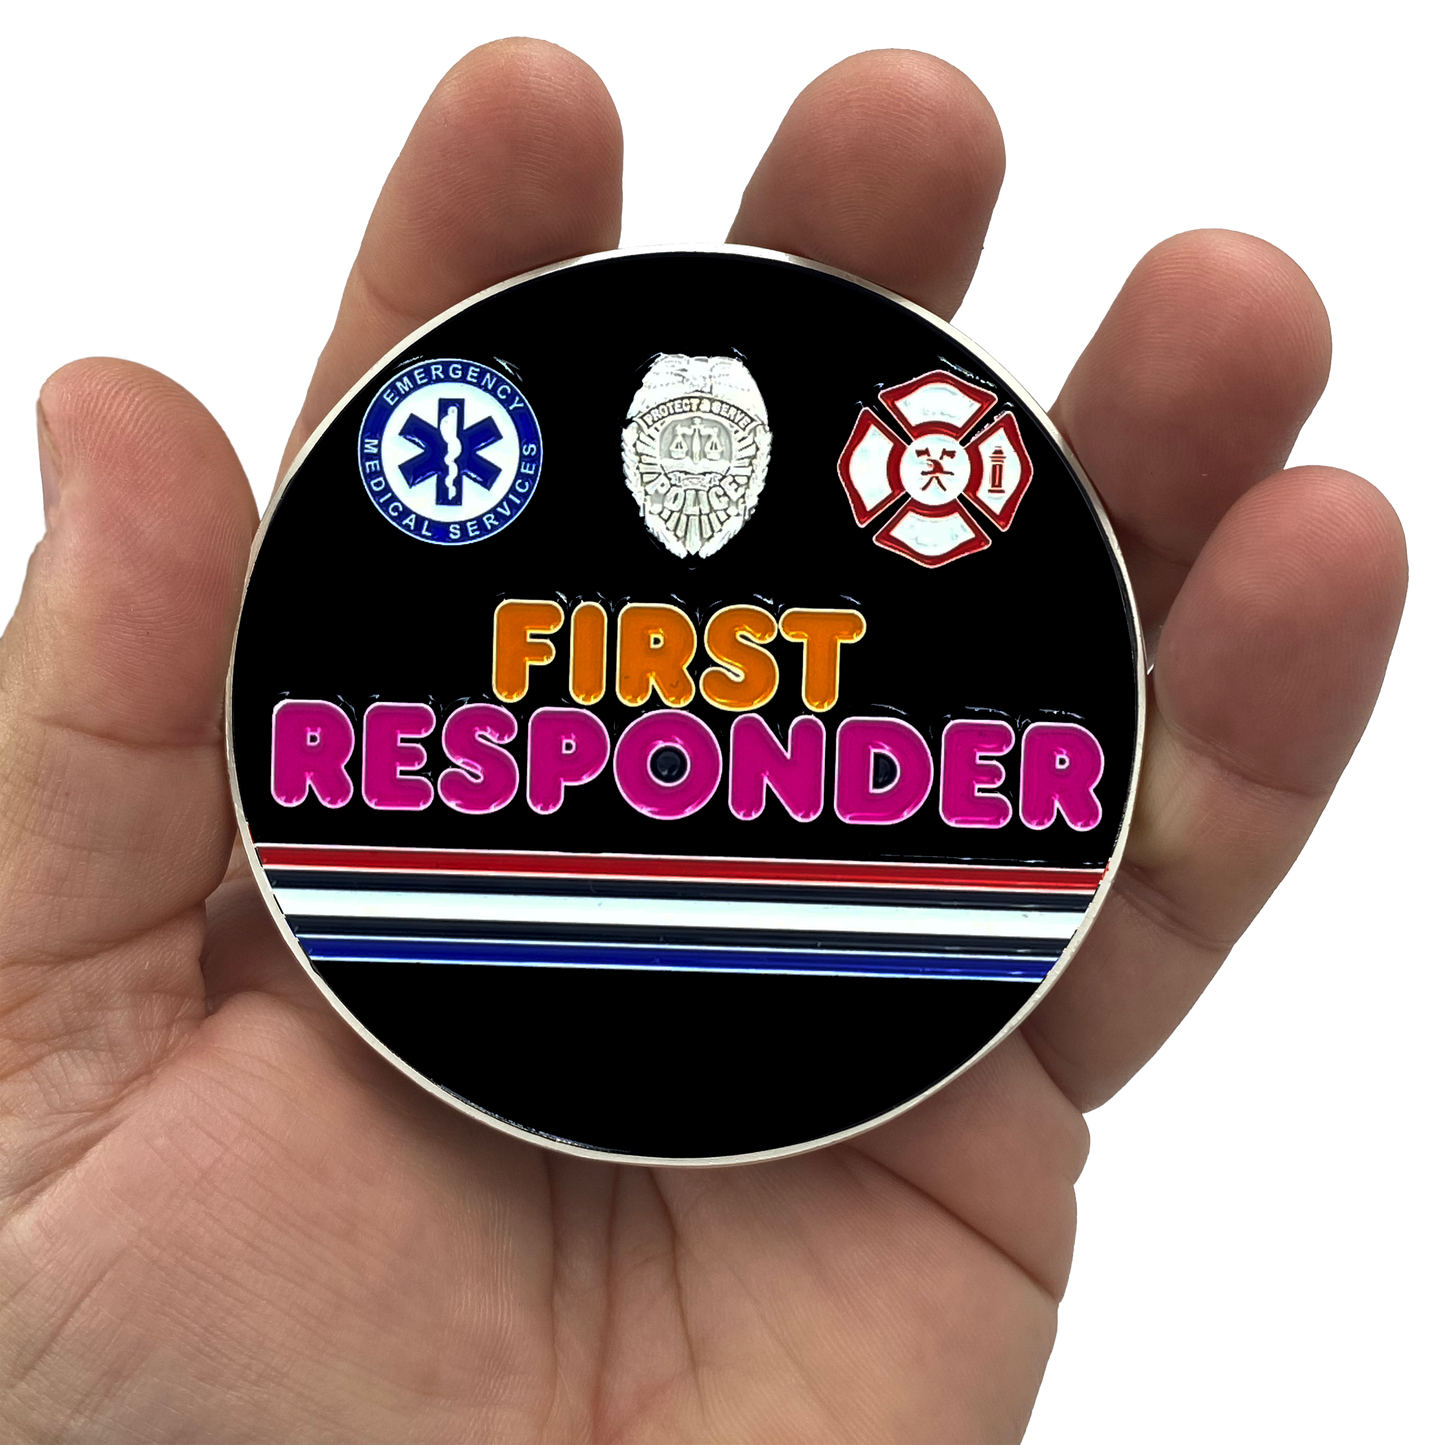 BL1-04B Send Donuts Police First Responders Dunkin inspired challenge coin Paramedic Firefighter Cops